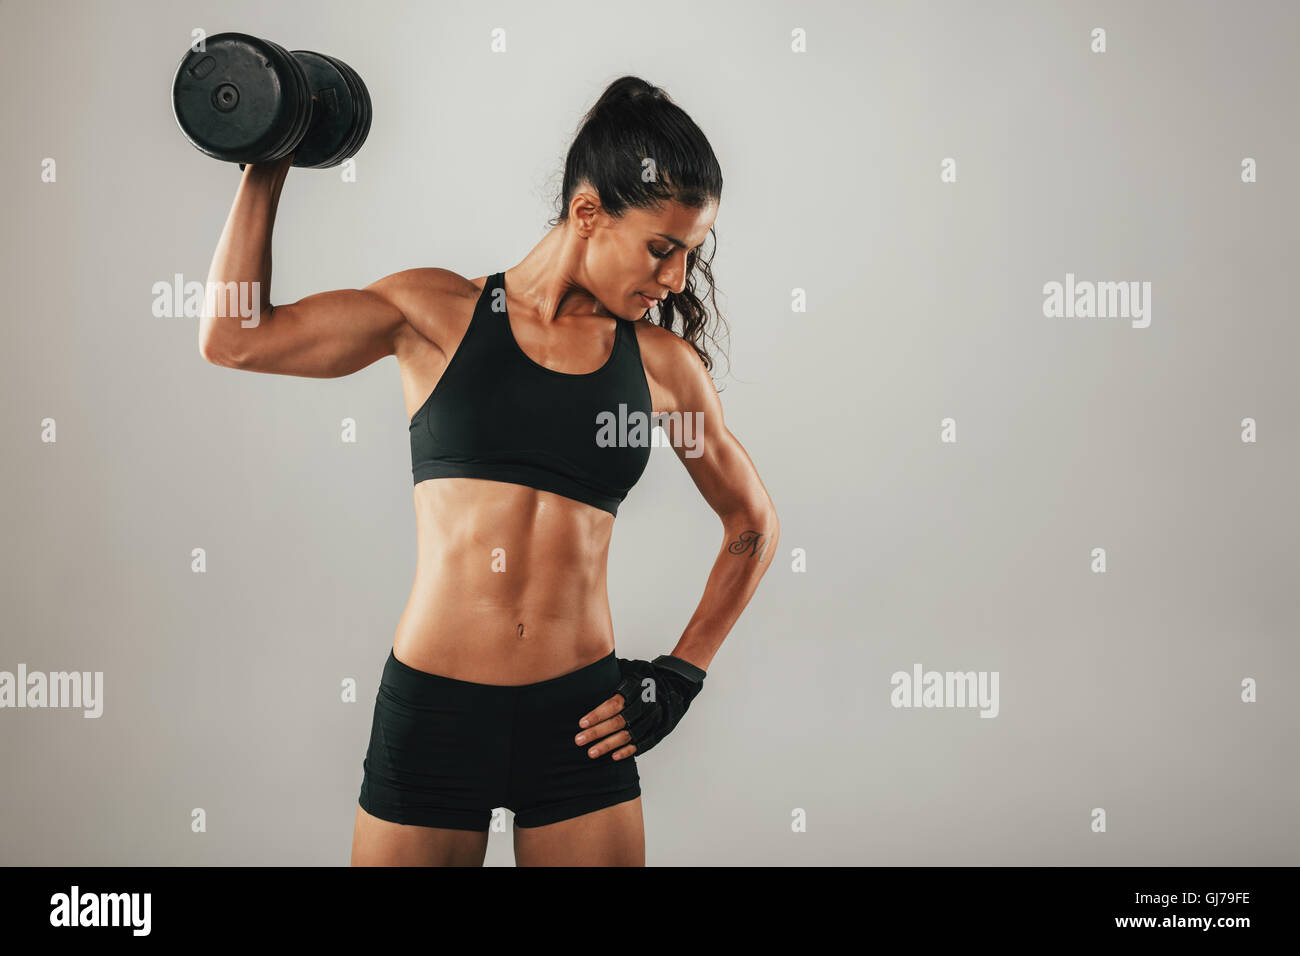 https://c8.alamy.com/comp/GJ79FE/toned-muscular-young-woman-working-out-with-weights-raising-a-dumbbell-GJ79FE.jpg